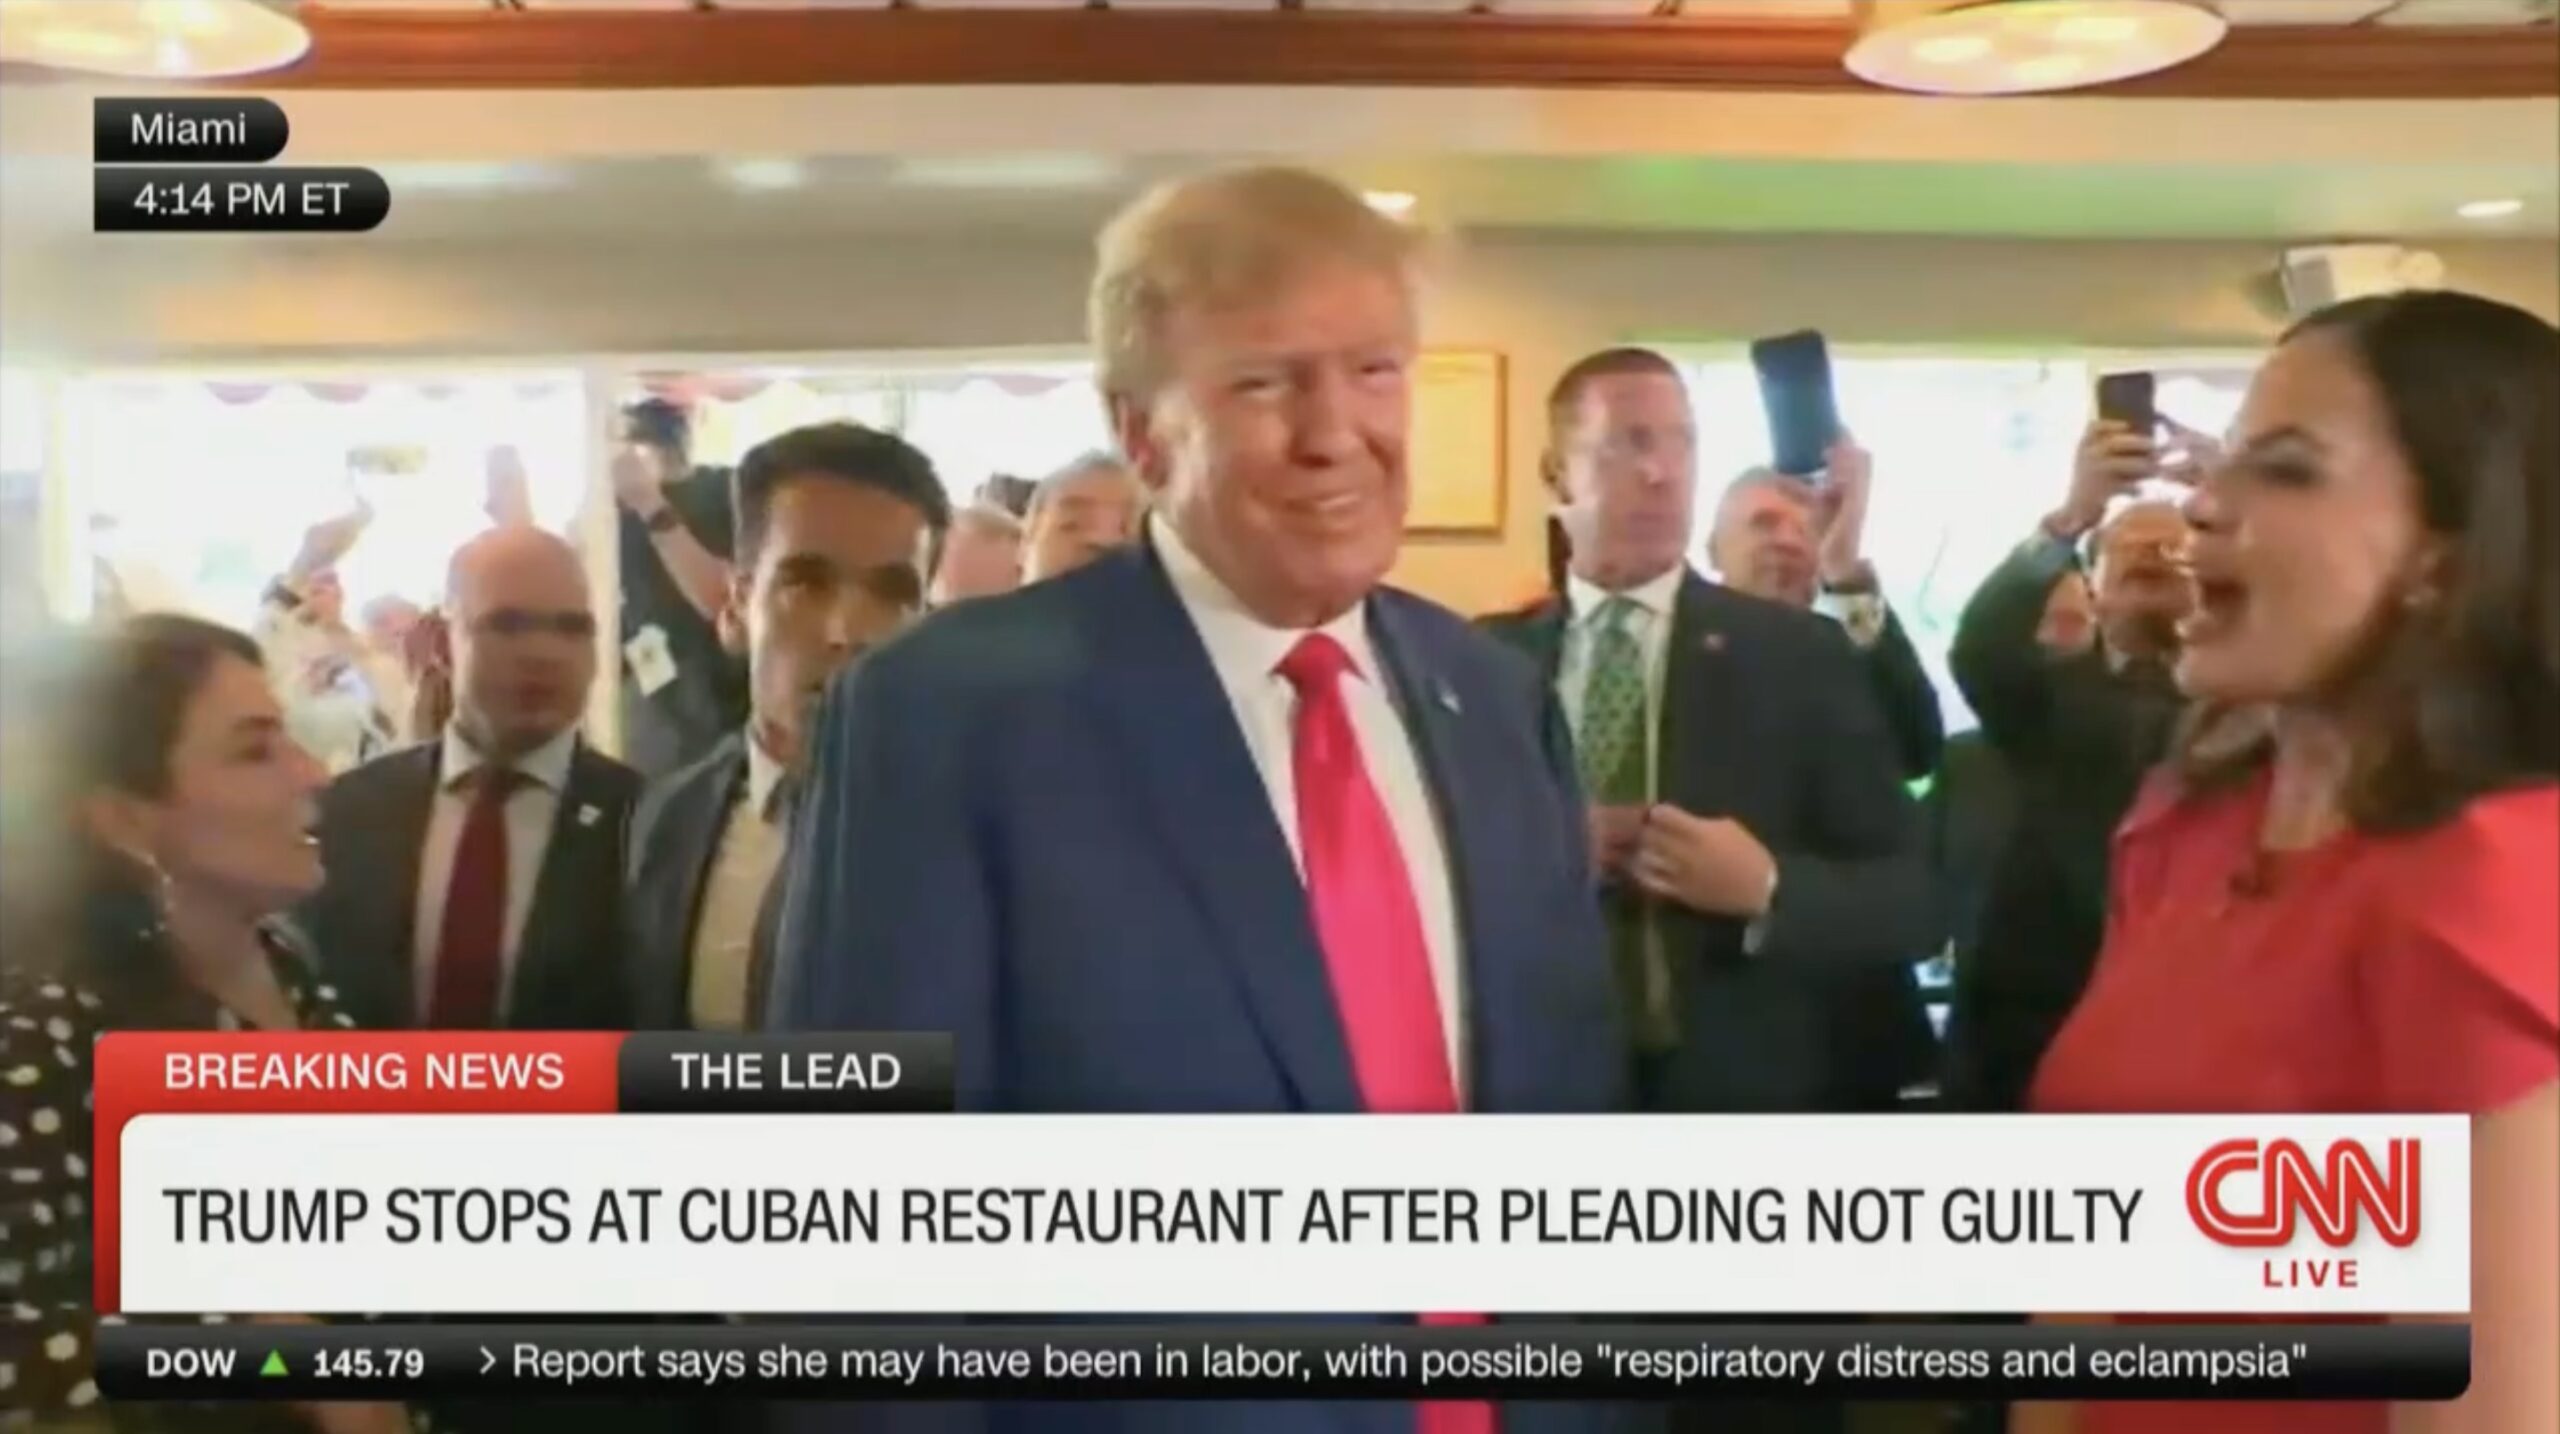 Trump Reportedly Left Restaurant Without Paying Any Bills After Telling His Supporters ‘Food For Everyone!’